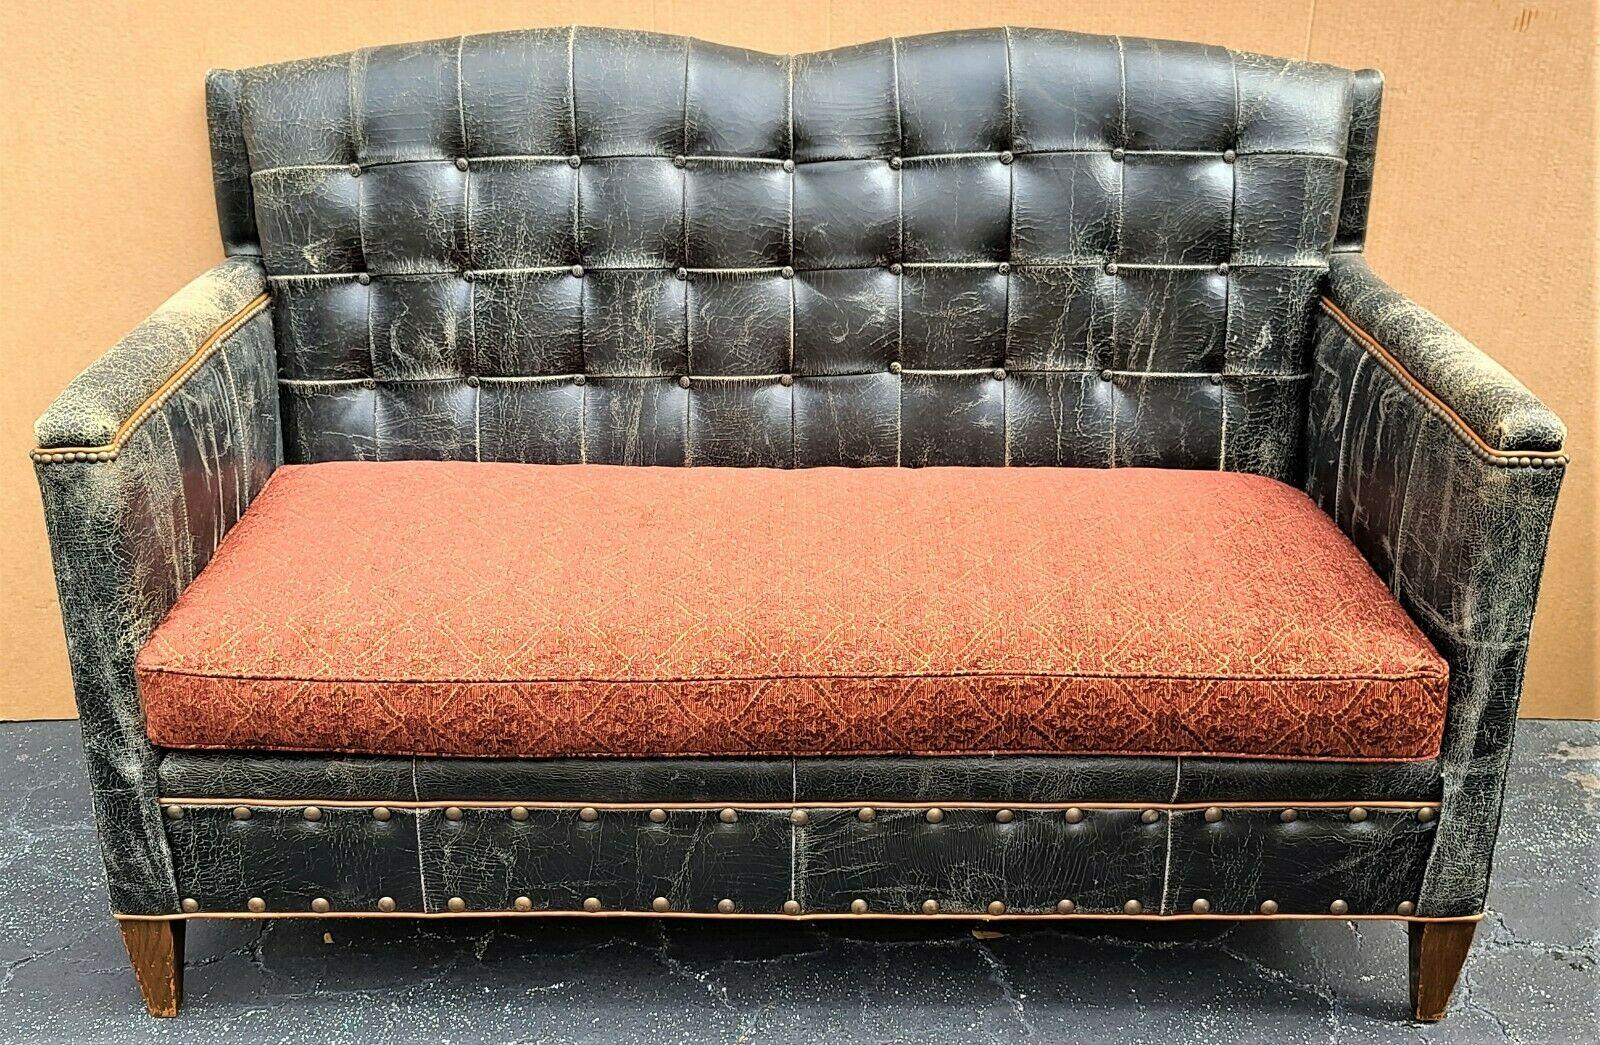 Offering one of our recent palm beach estate fine furniture acquisitions of a
Old Hickory Tannery distressed leather settee loveseat with new seat upholstery

Approximate Measurements in Inches
40